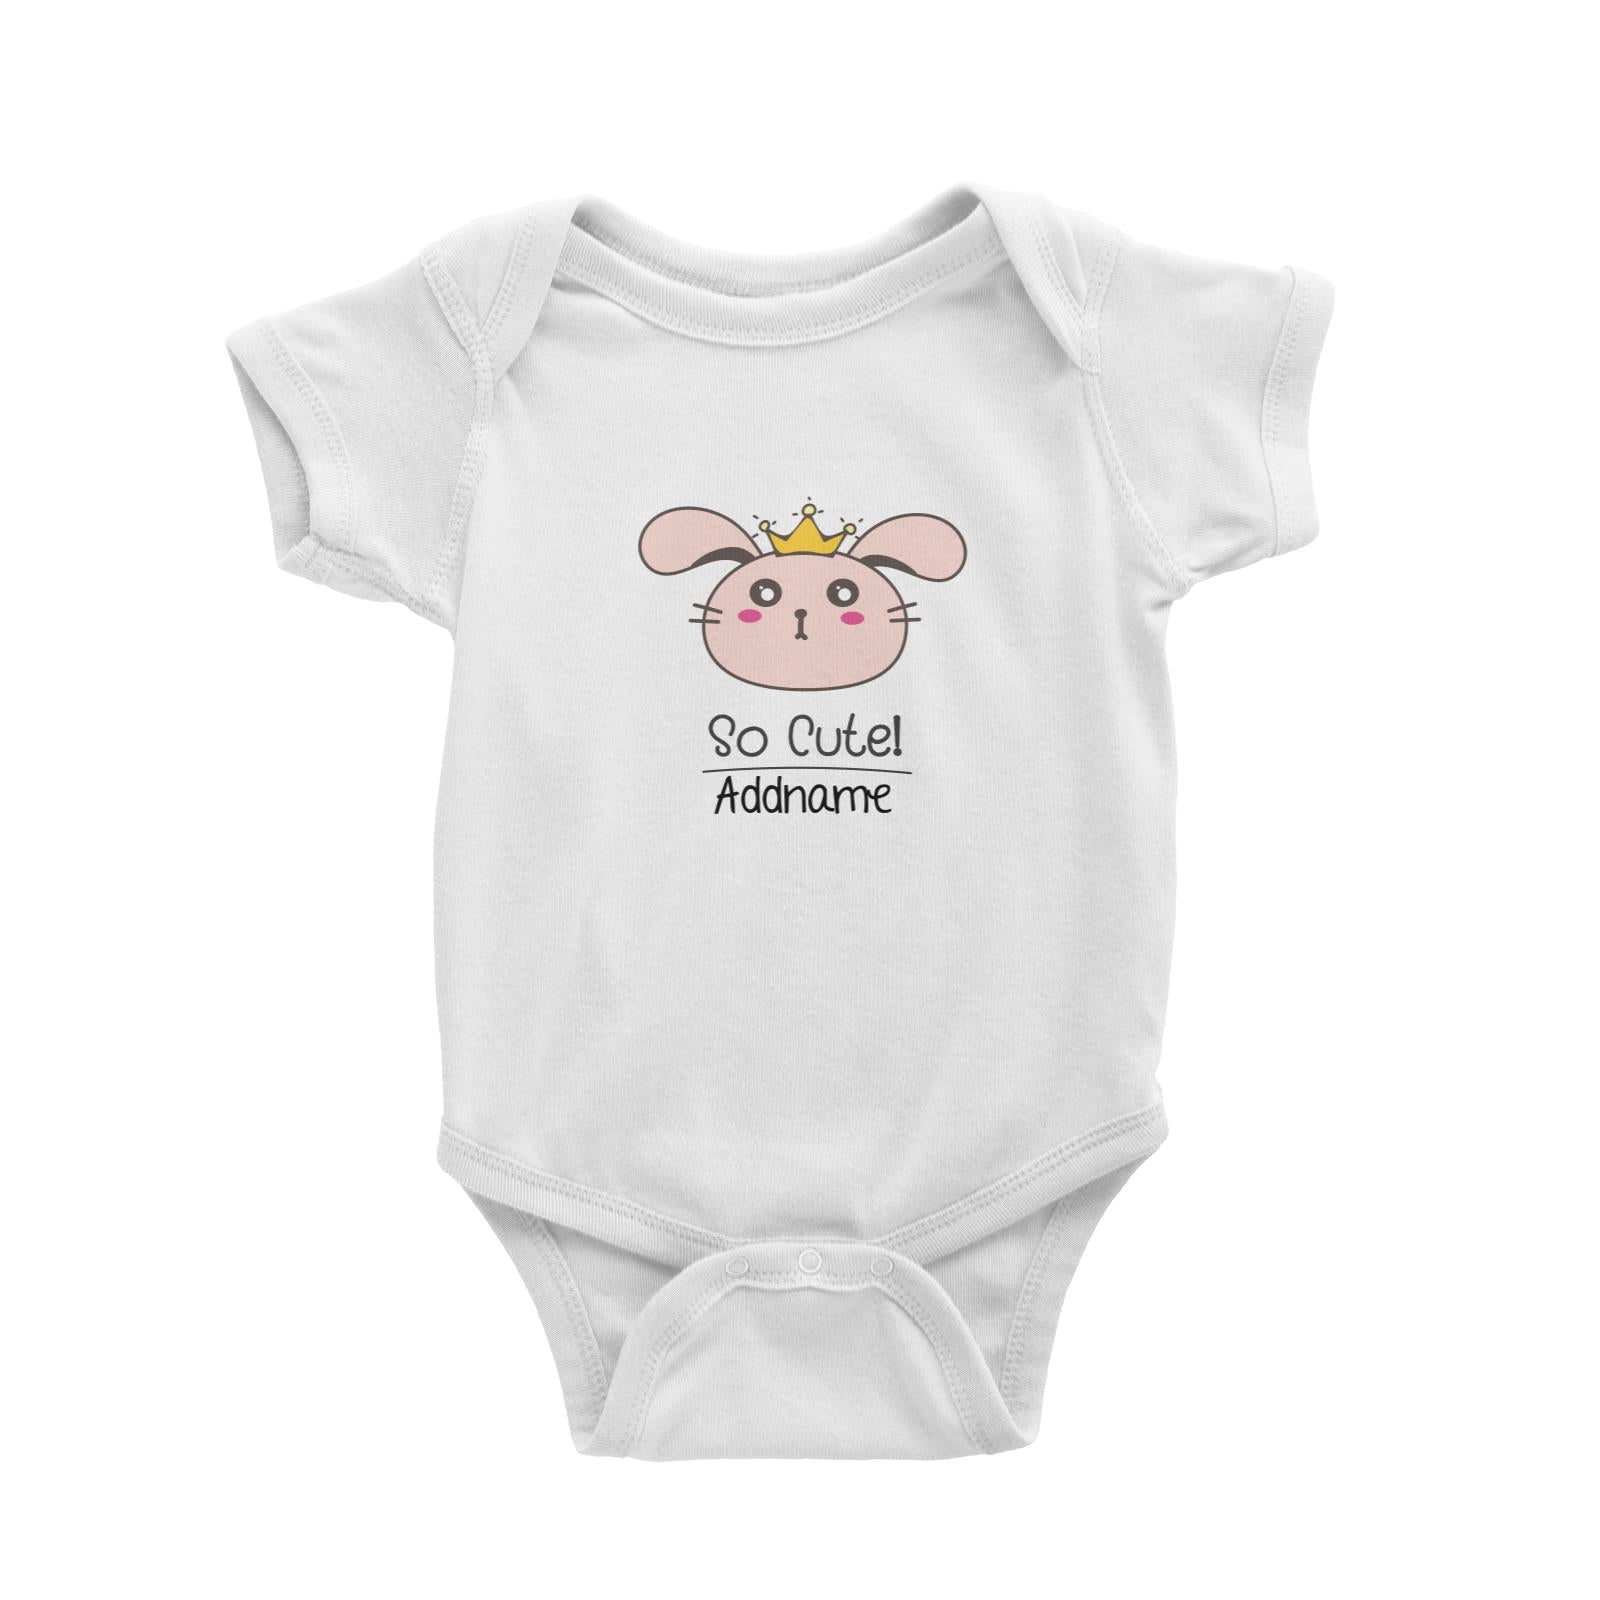 Cute Animals And Friends Series Cute Bunny With Crown Addname Baby Romper